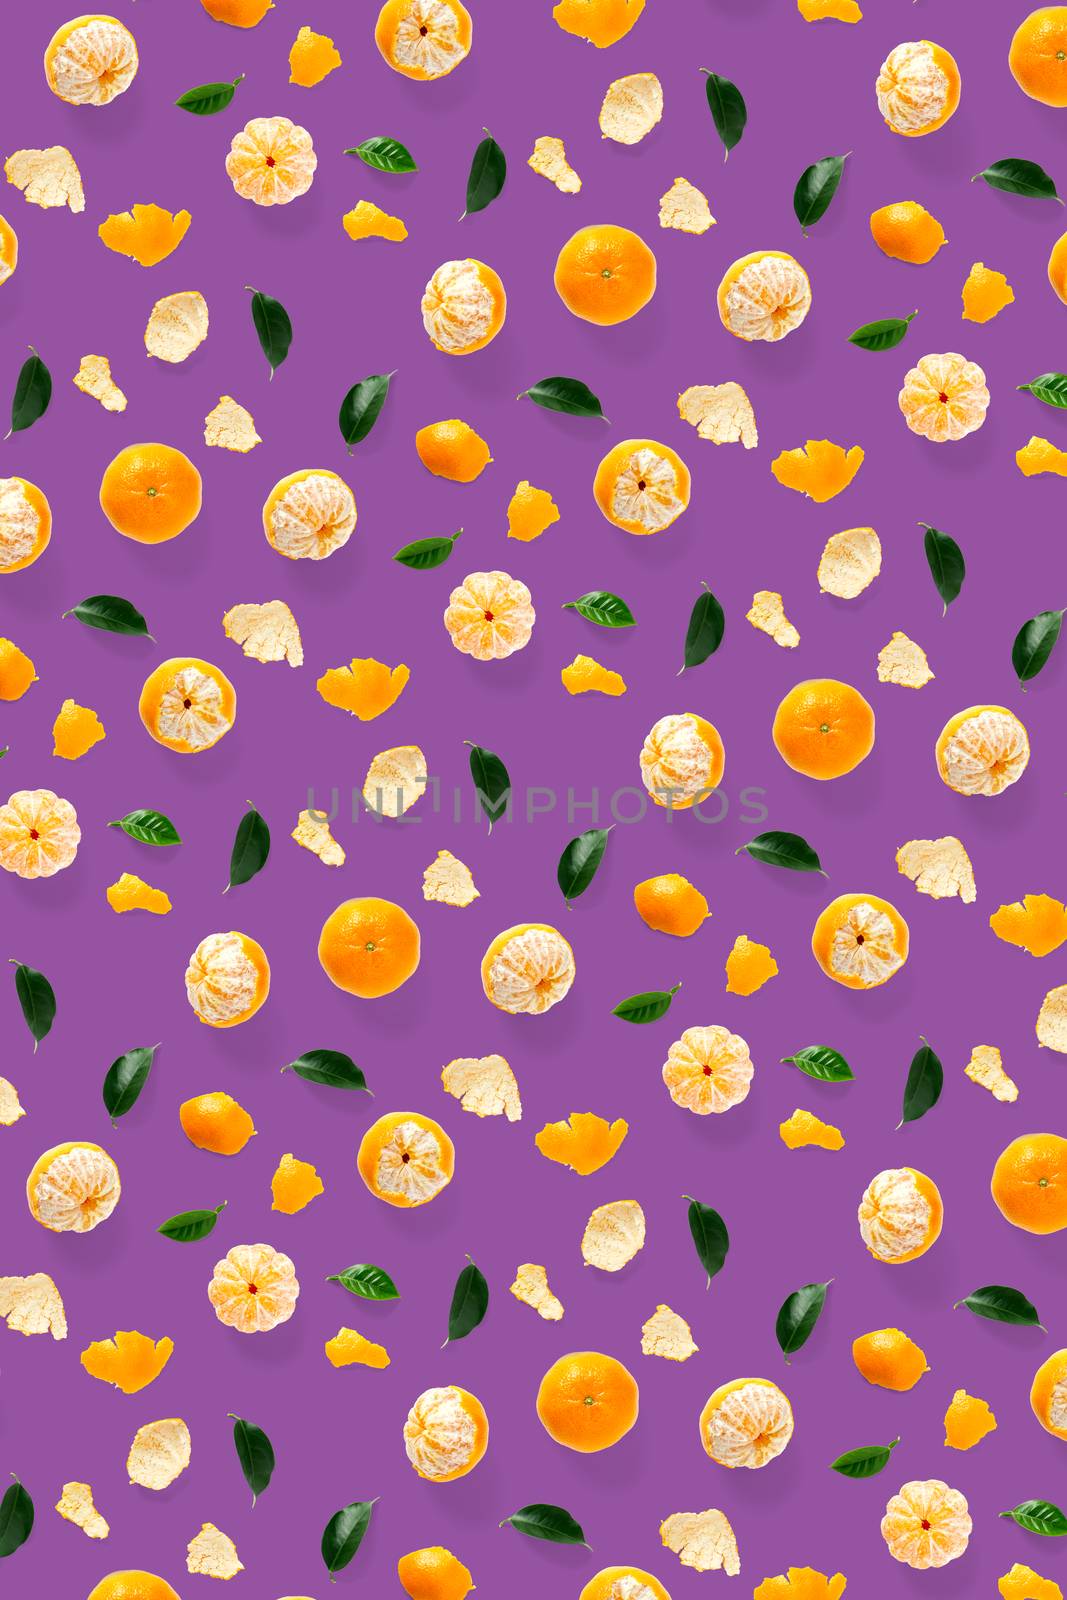 Isolated tangerine citrus collection background with leaves. Whole tangerines or mandarin orange fruits isolated on purple background. mandarine orange background not pattern